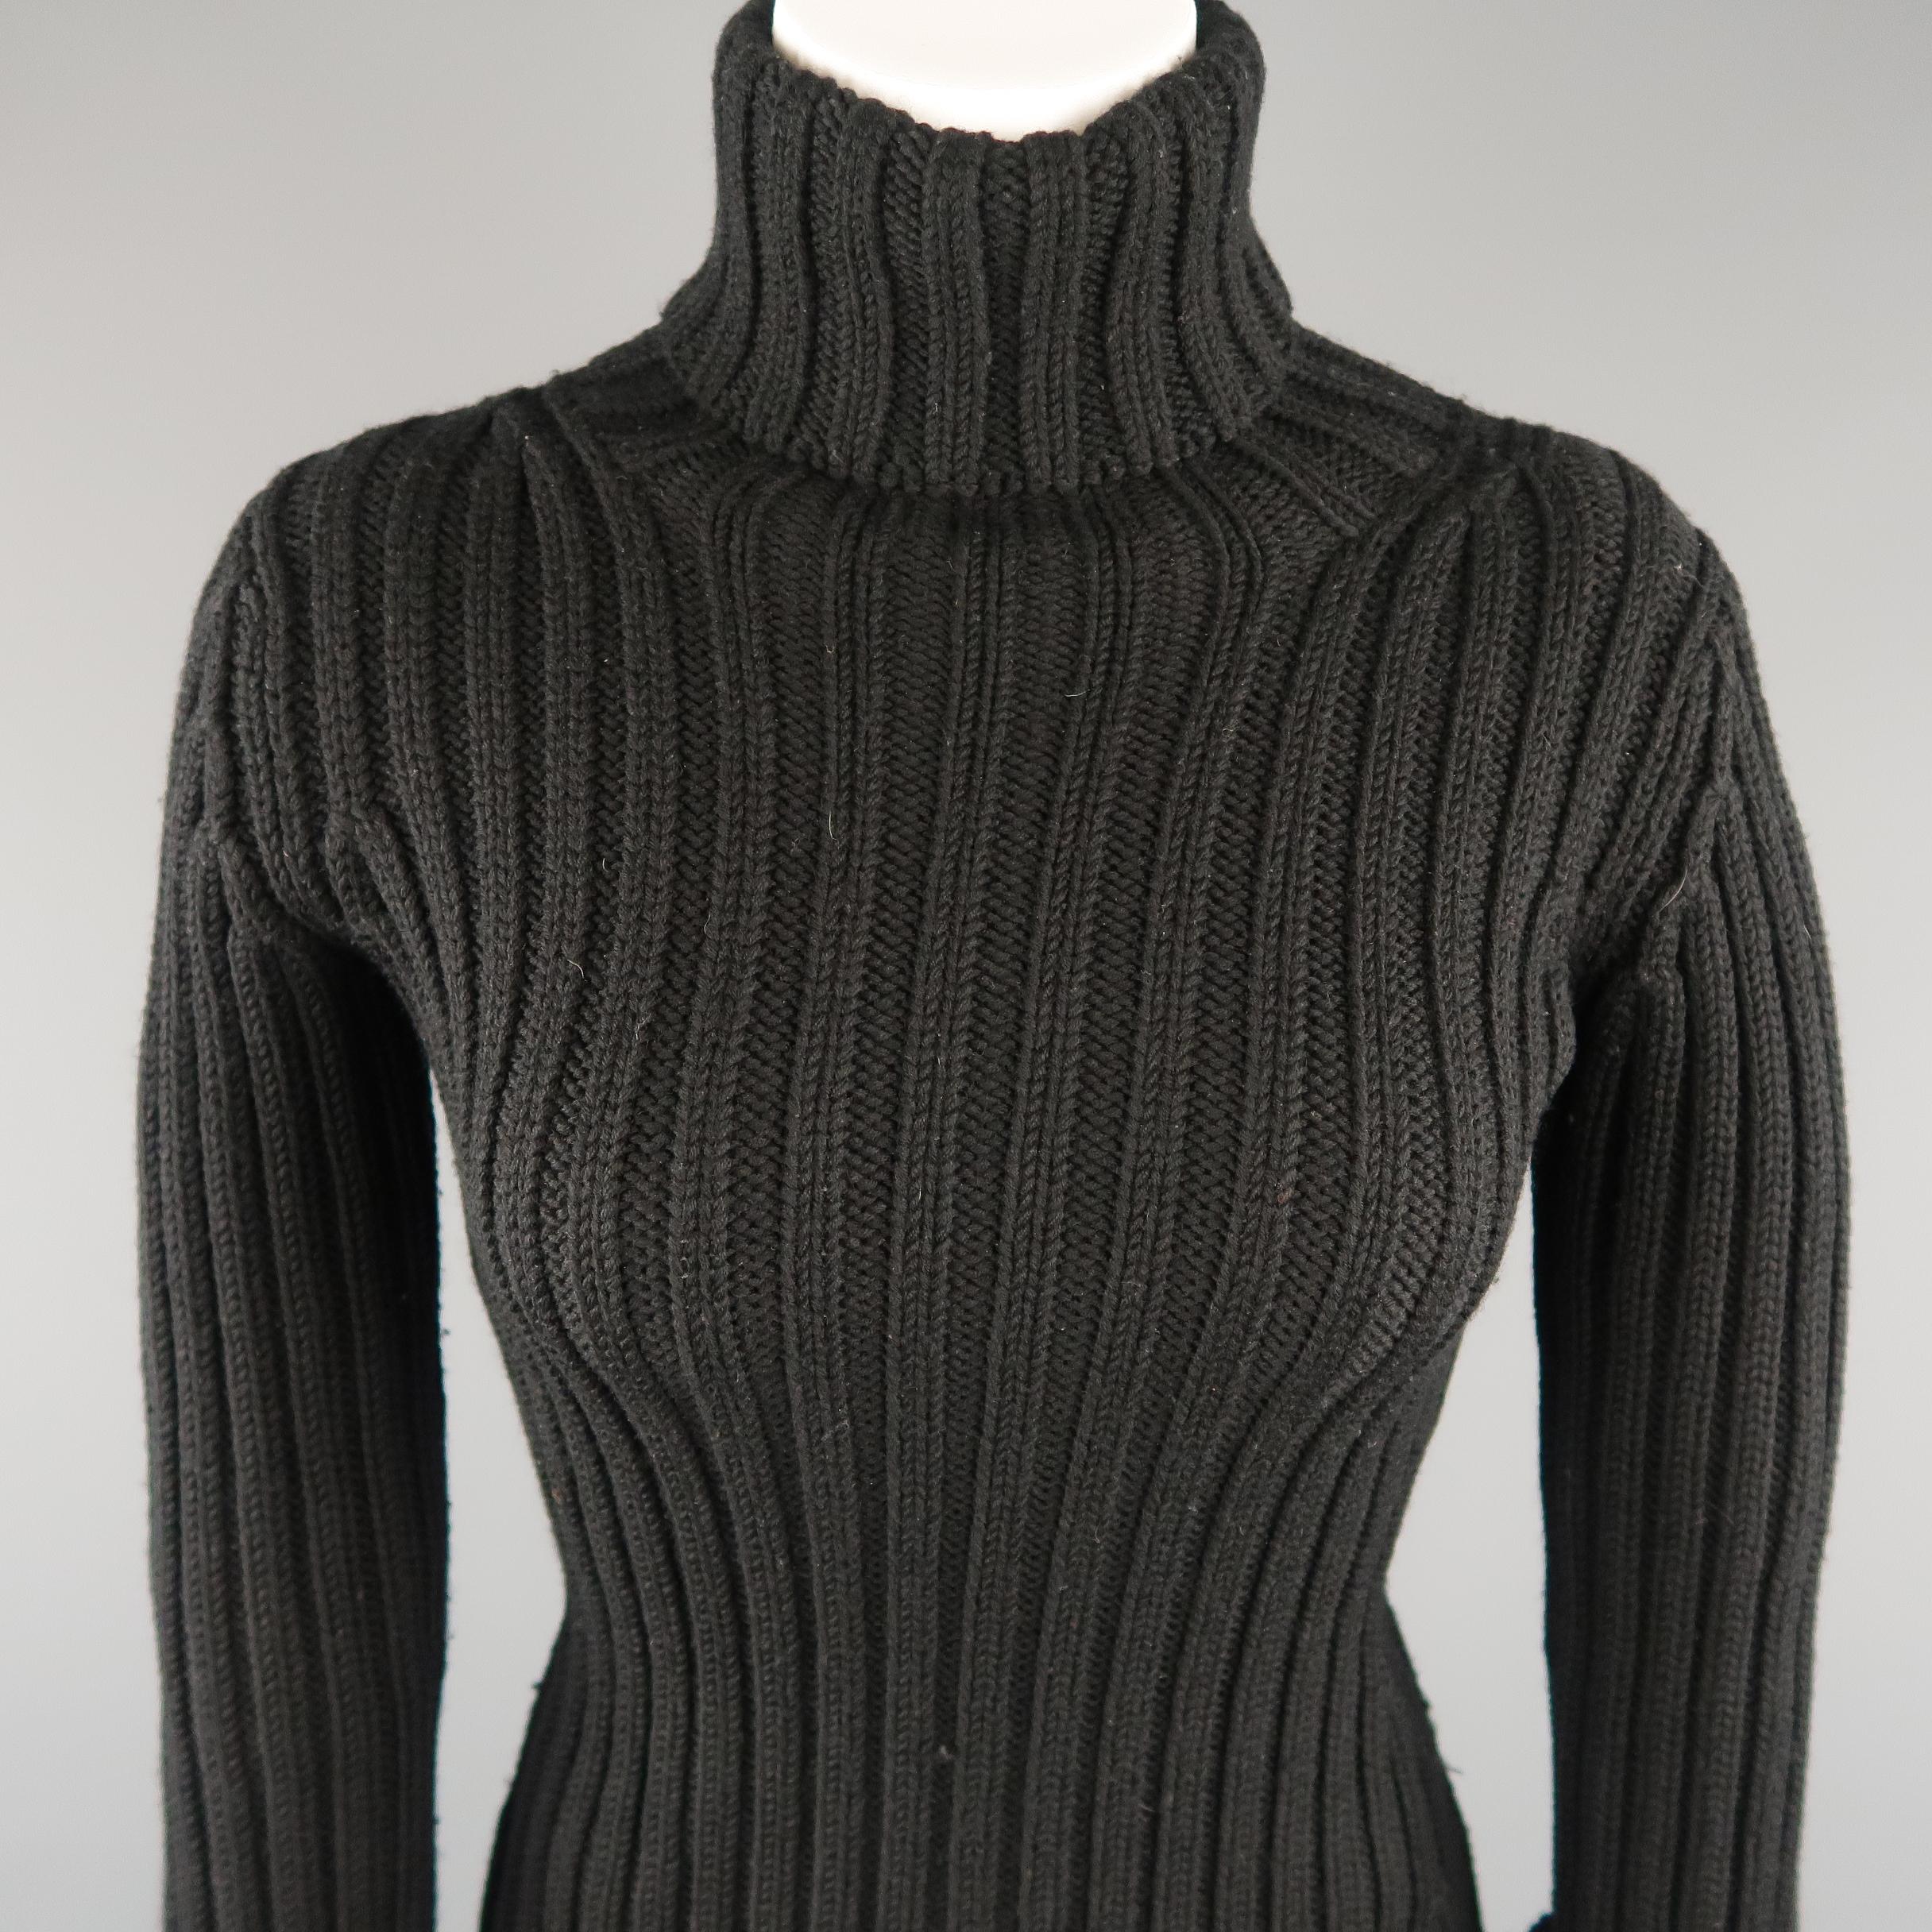 YOHJI YAMAMOTO turtleneck comes in ribbed wool knit with a folded high neck, fitted body, and cuffed sleeves.  Made in Japan.
 
Excellent Pre-Owned Condition.
Marked: JP 3
 
Measurements:
 
Shoulder: 15 in.
Bust: 32 in.
Sleeve: 26 in.
Length: 25 in.